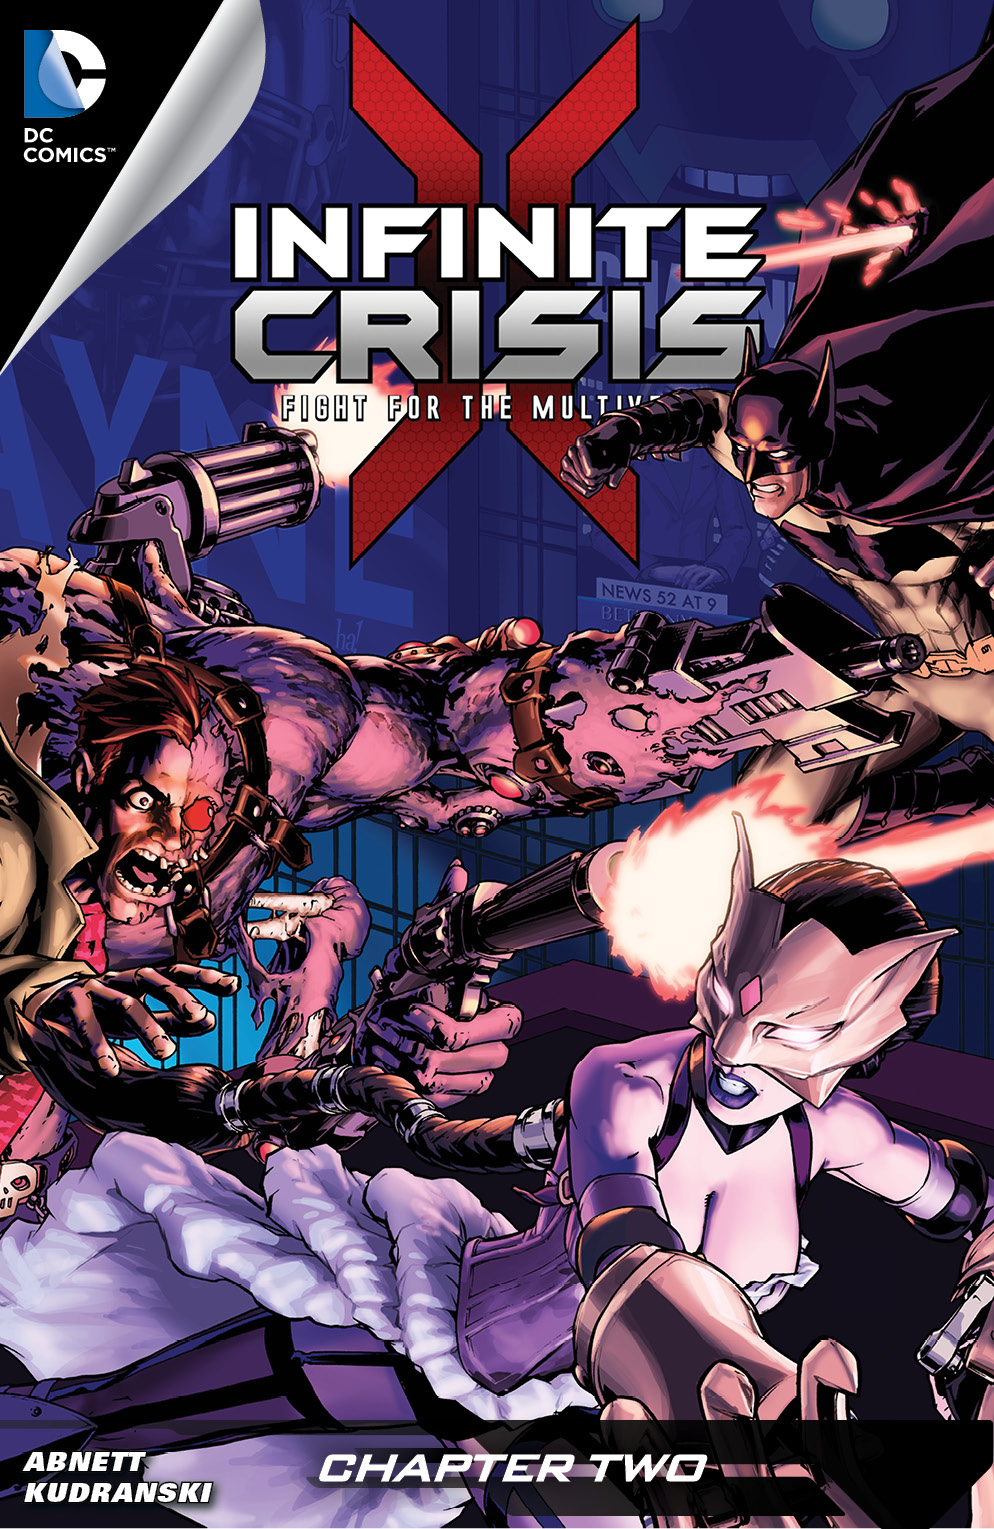 Infinite Crisis: Fight for the Multiverse #2 preview images